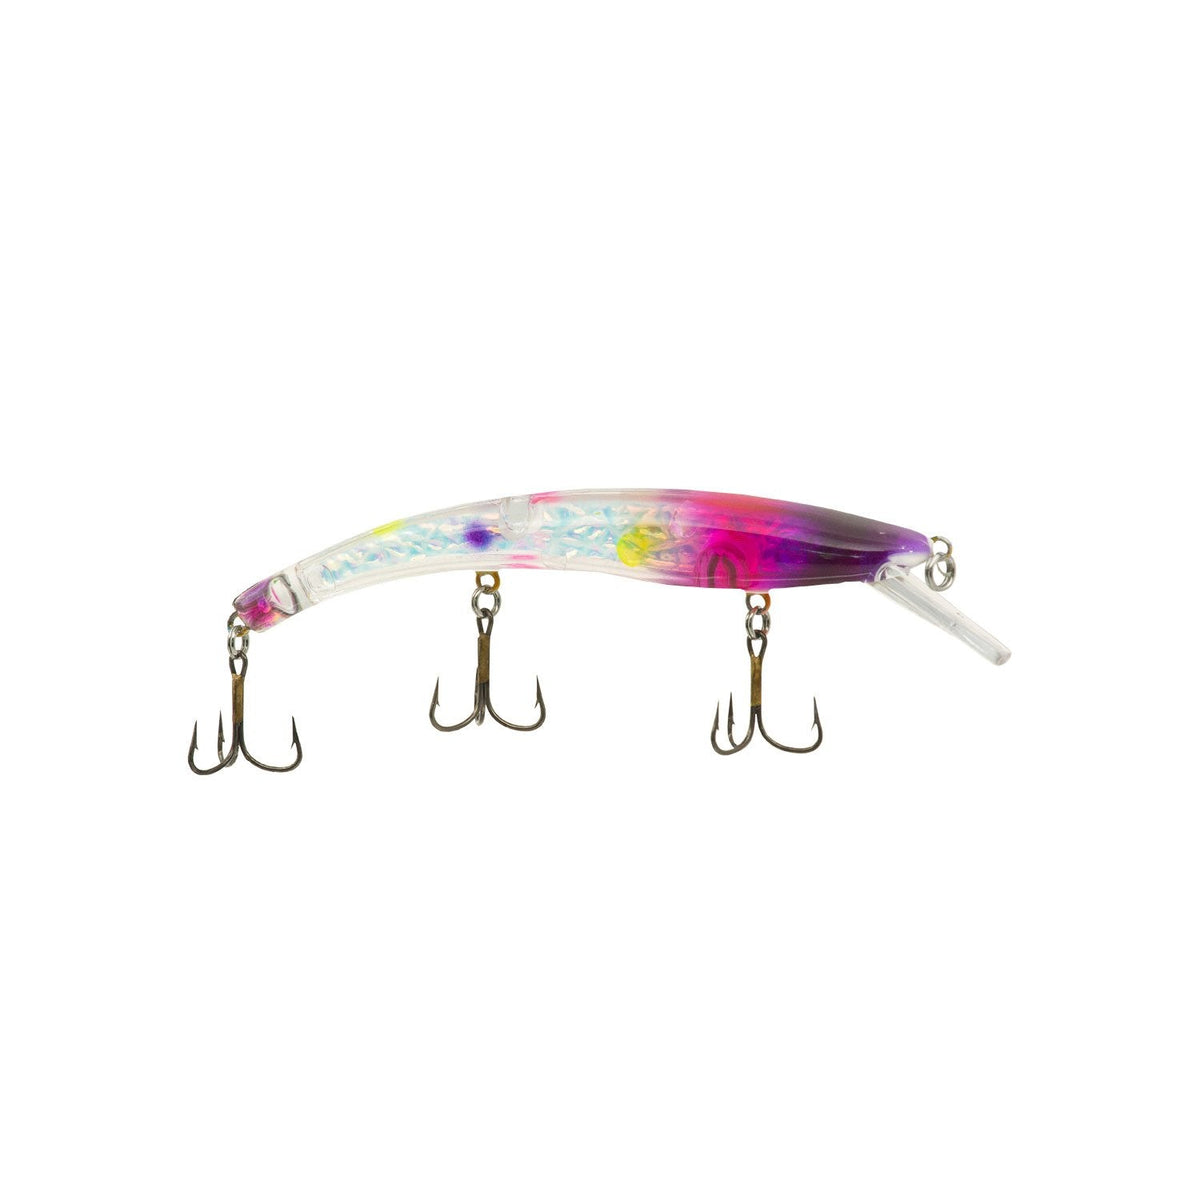 Reef Runner - 700 Series - Ripstick - Clearance Sale - Acme Tackle Company